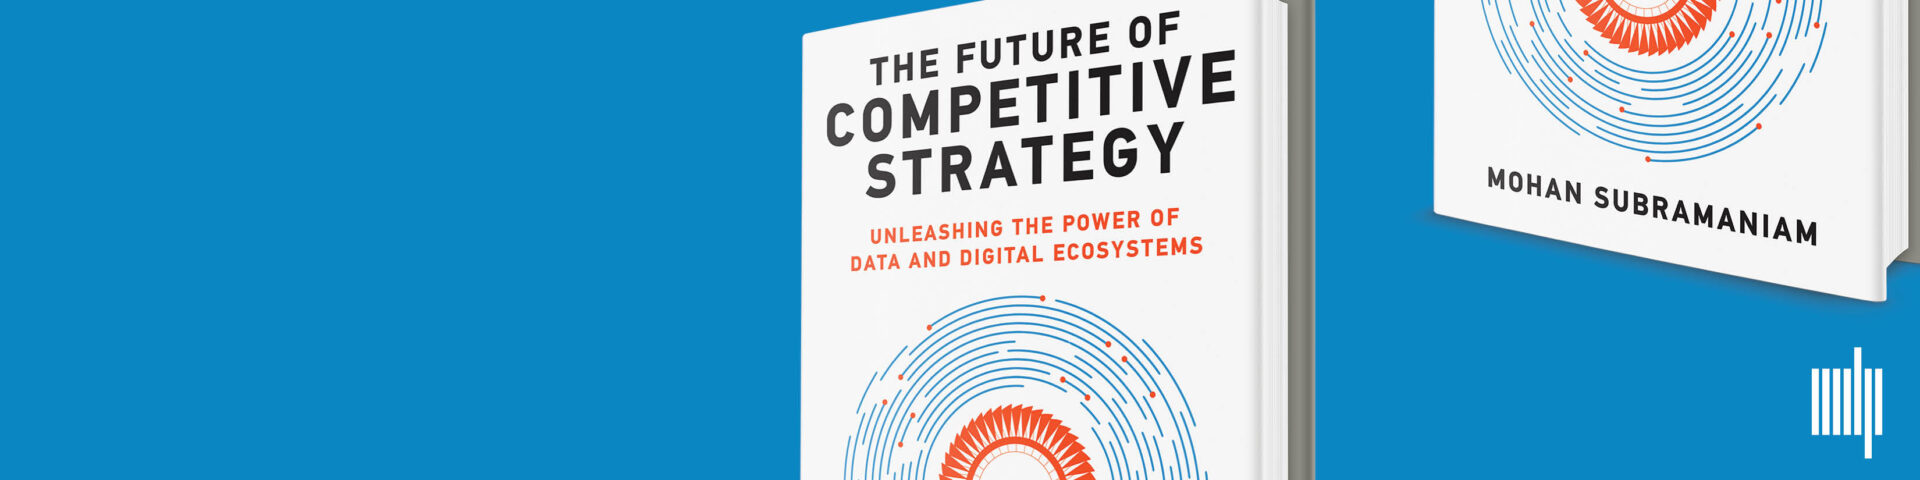 The future of competitive strategy